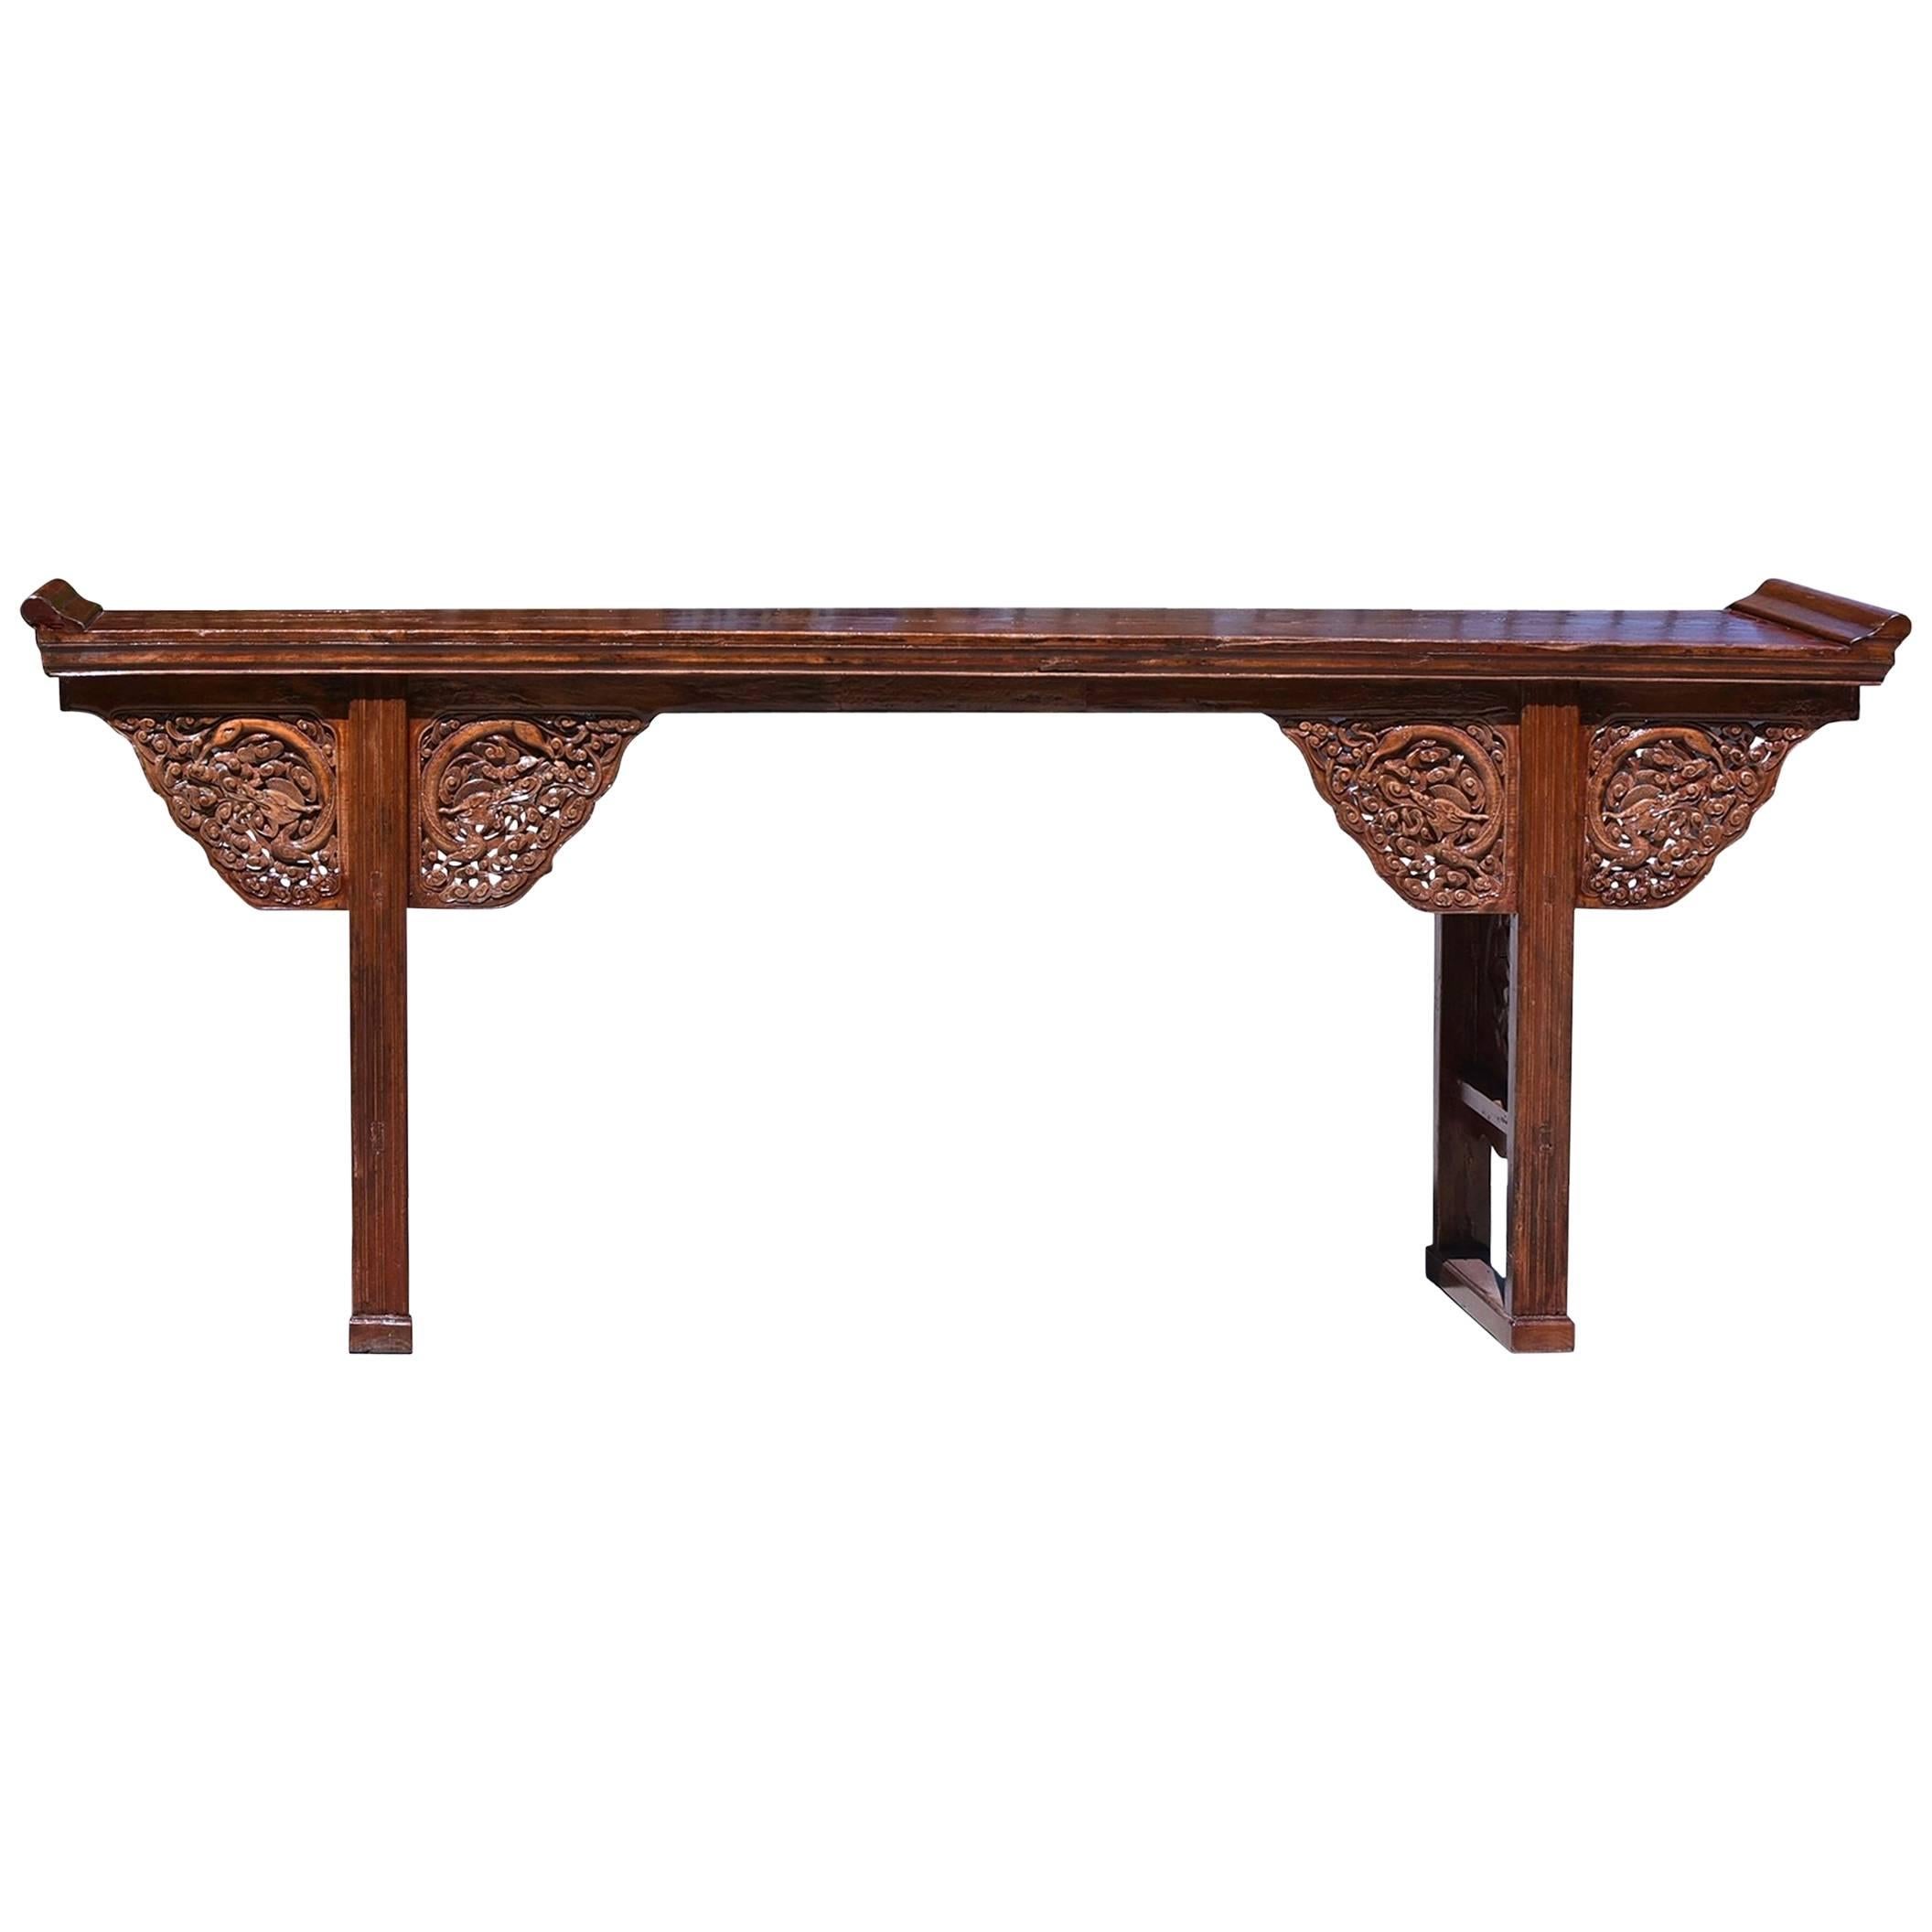 A fantastic Chinese altar with fine, detailed carvings depicting dragons flying in the clouds. The table has a beautiful, reddish top that is made of a single solid board. Its raised flanges pay homage to the Chinese temple architecture. There are